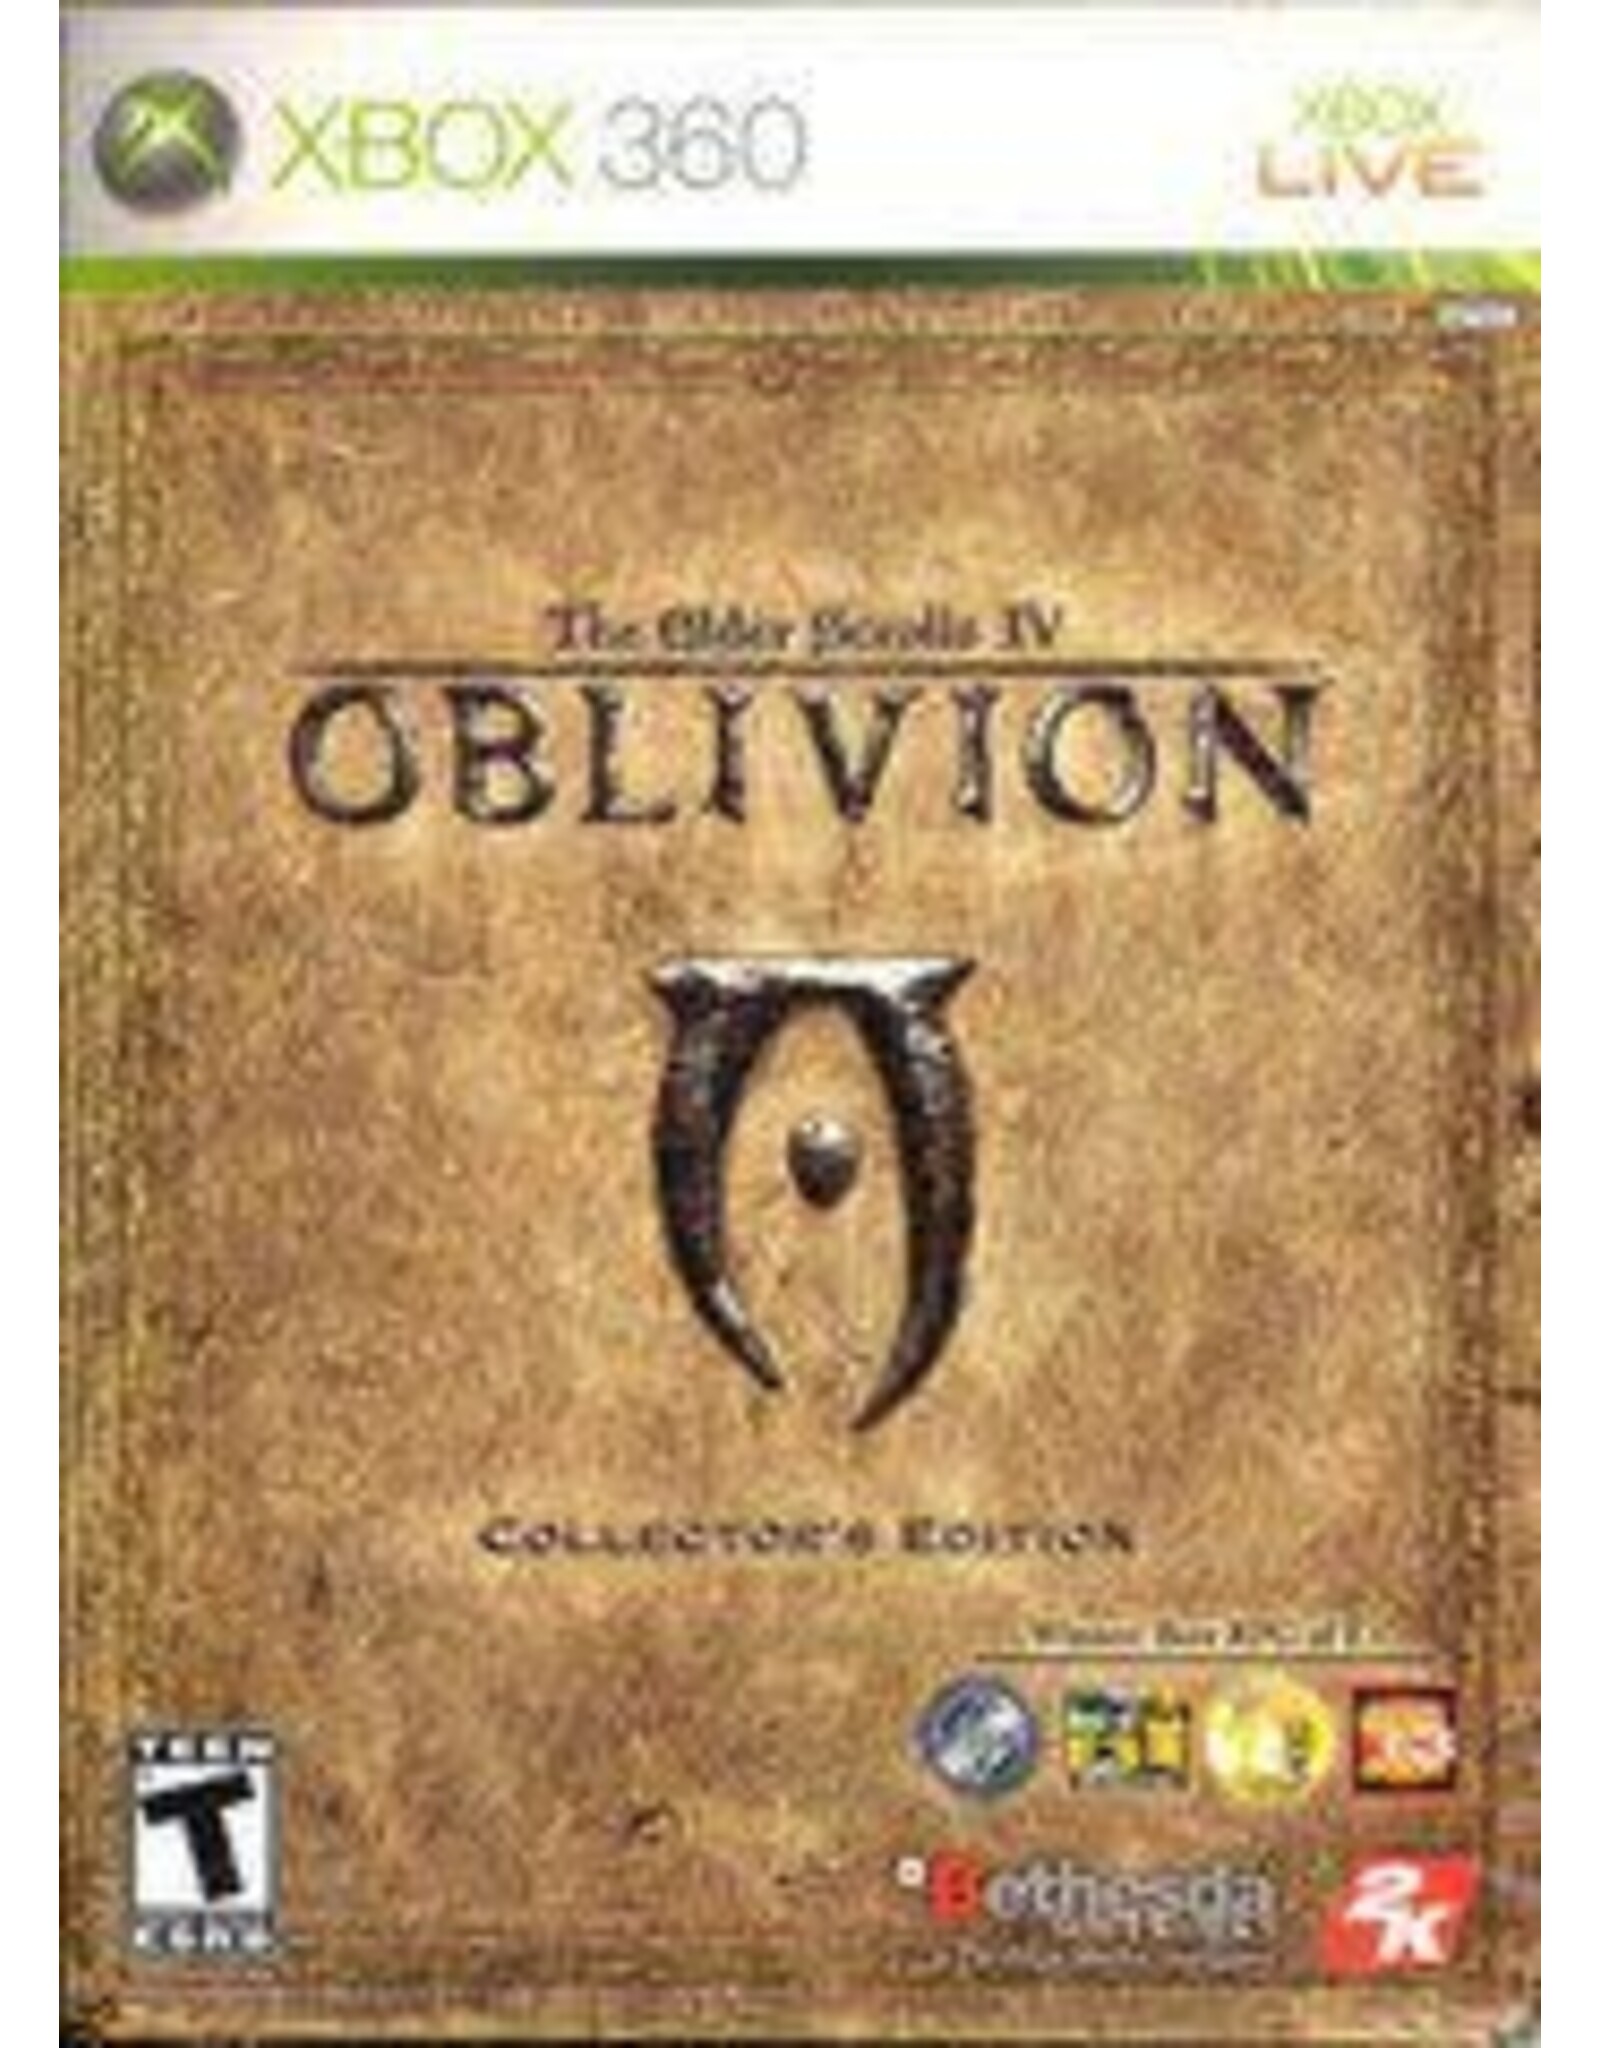 Xbox 360 Oblivion, Elder Scrolls IV Collector's Edition (Missing Outer Box, No Coin)